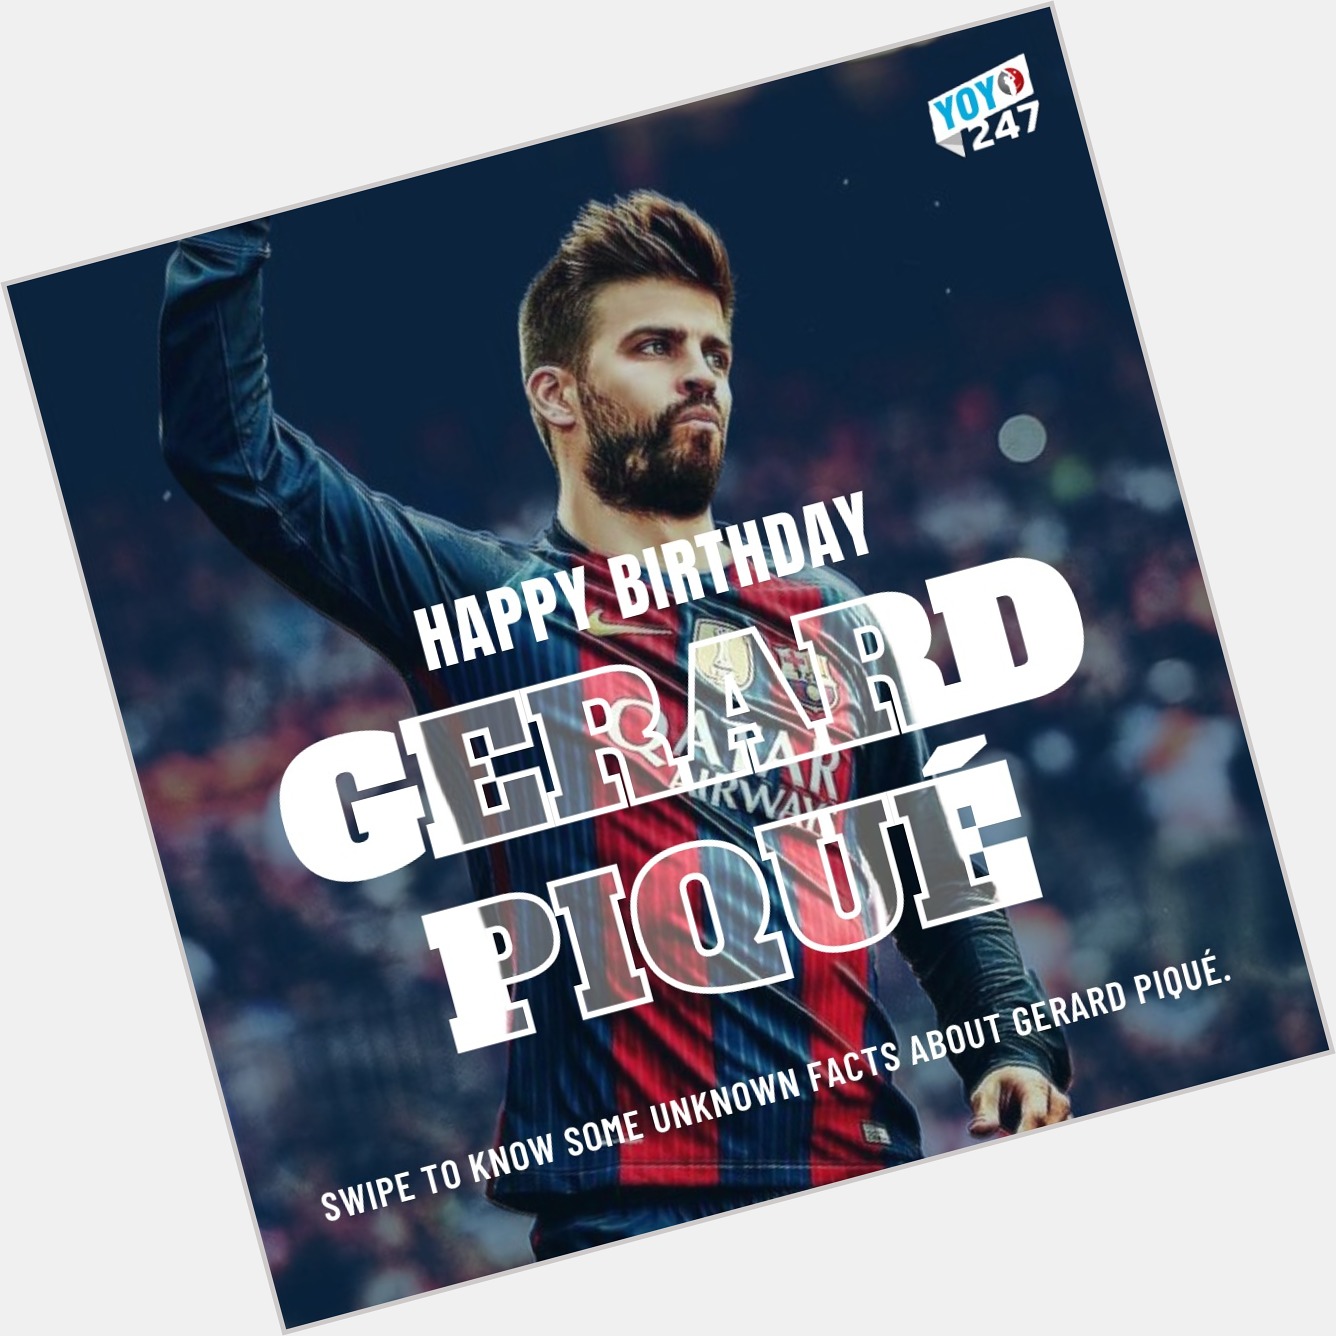 Wishing Gerard Pique, one of the greatest football players, a very happy birthday!  